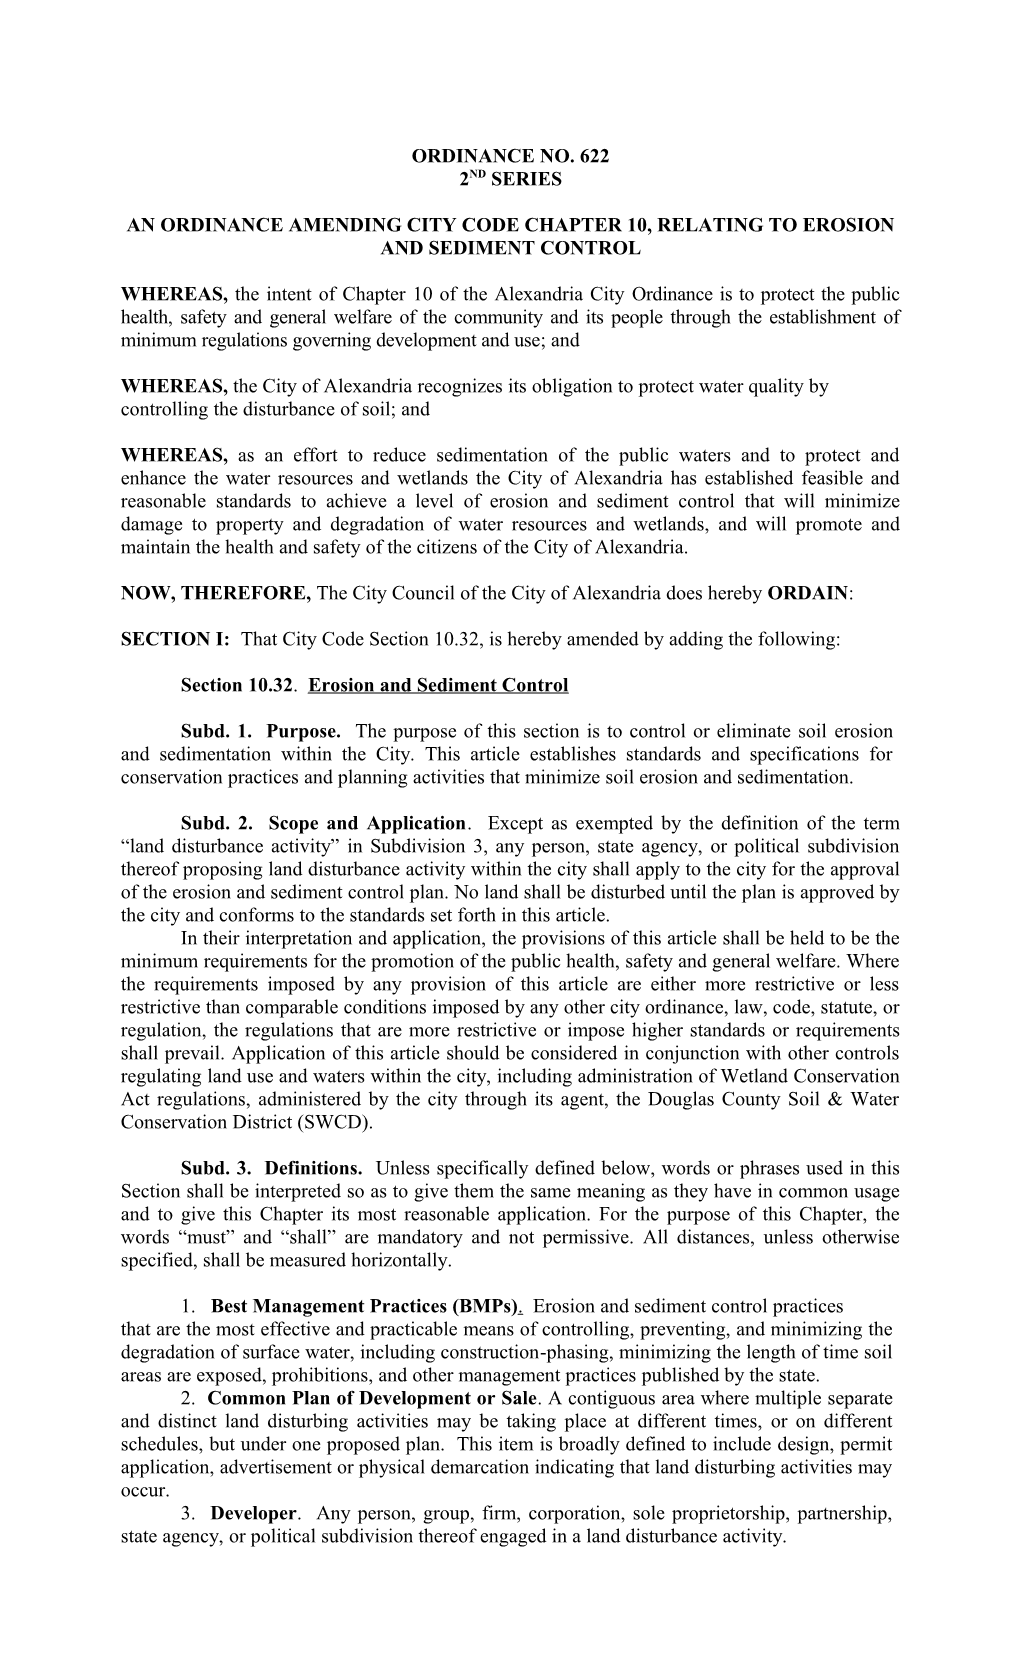 An Ordinance Amending City Code Chapter 10, Relating to Erosion and Sediment Control